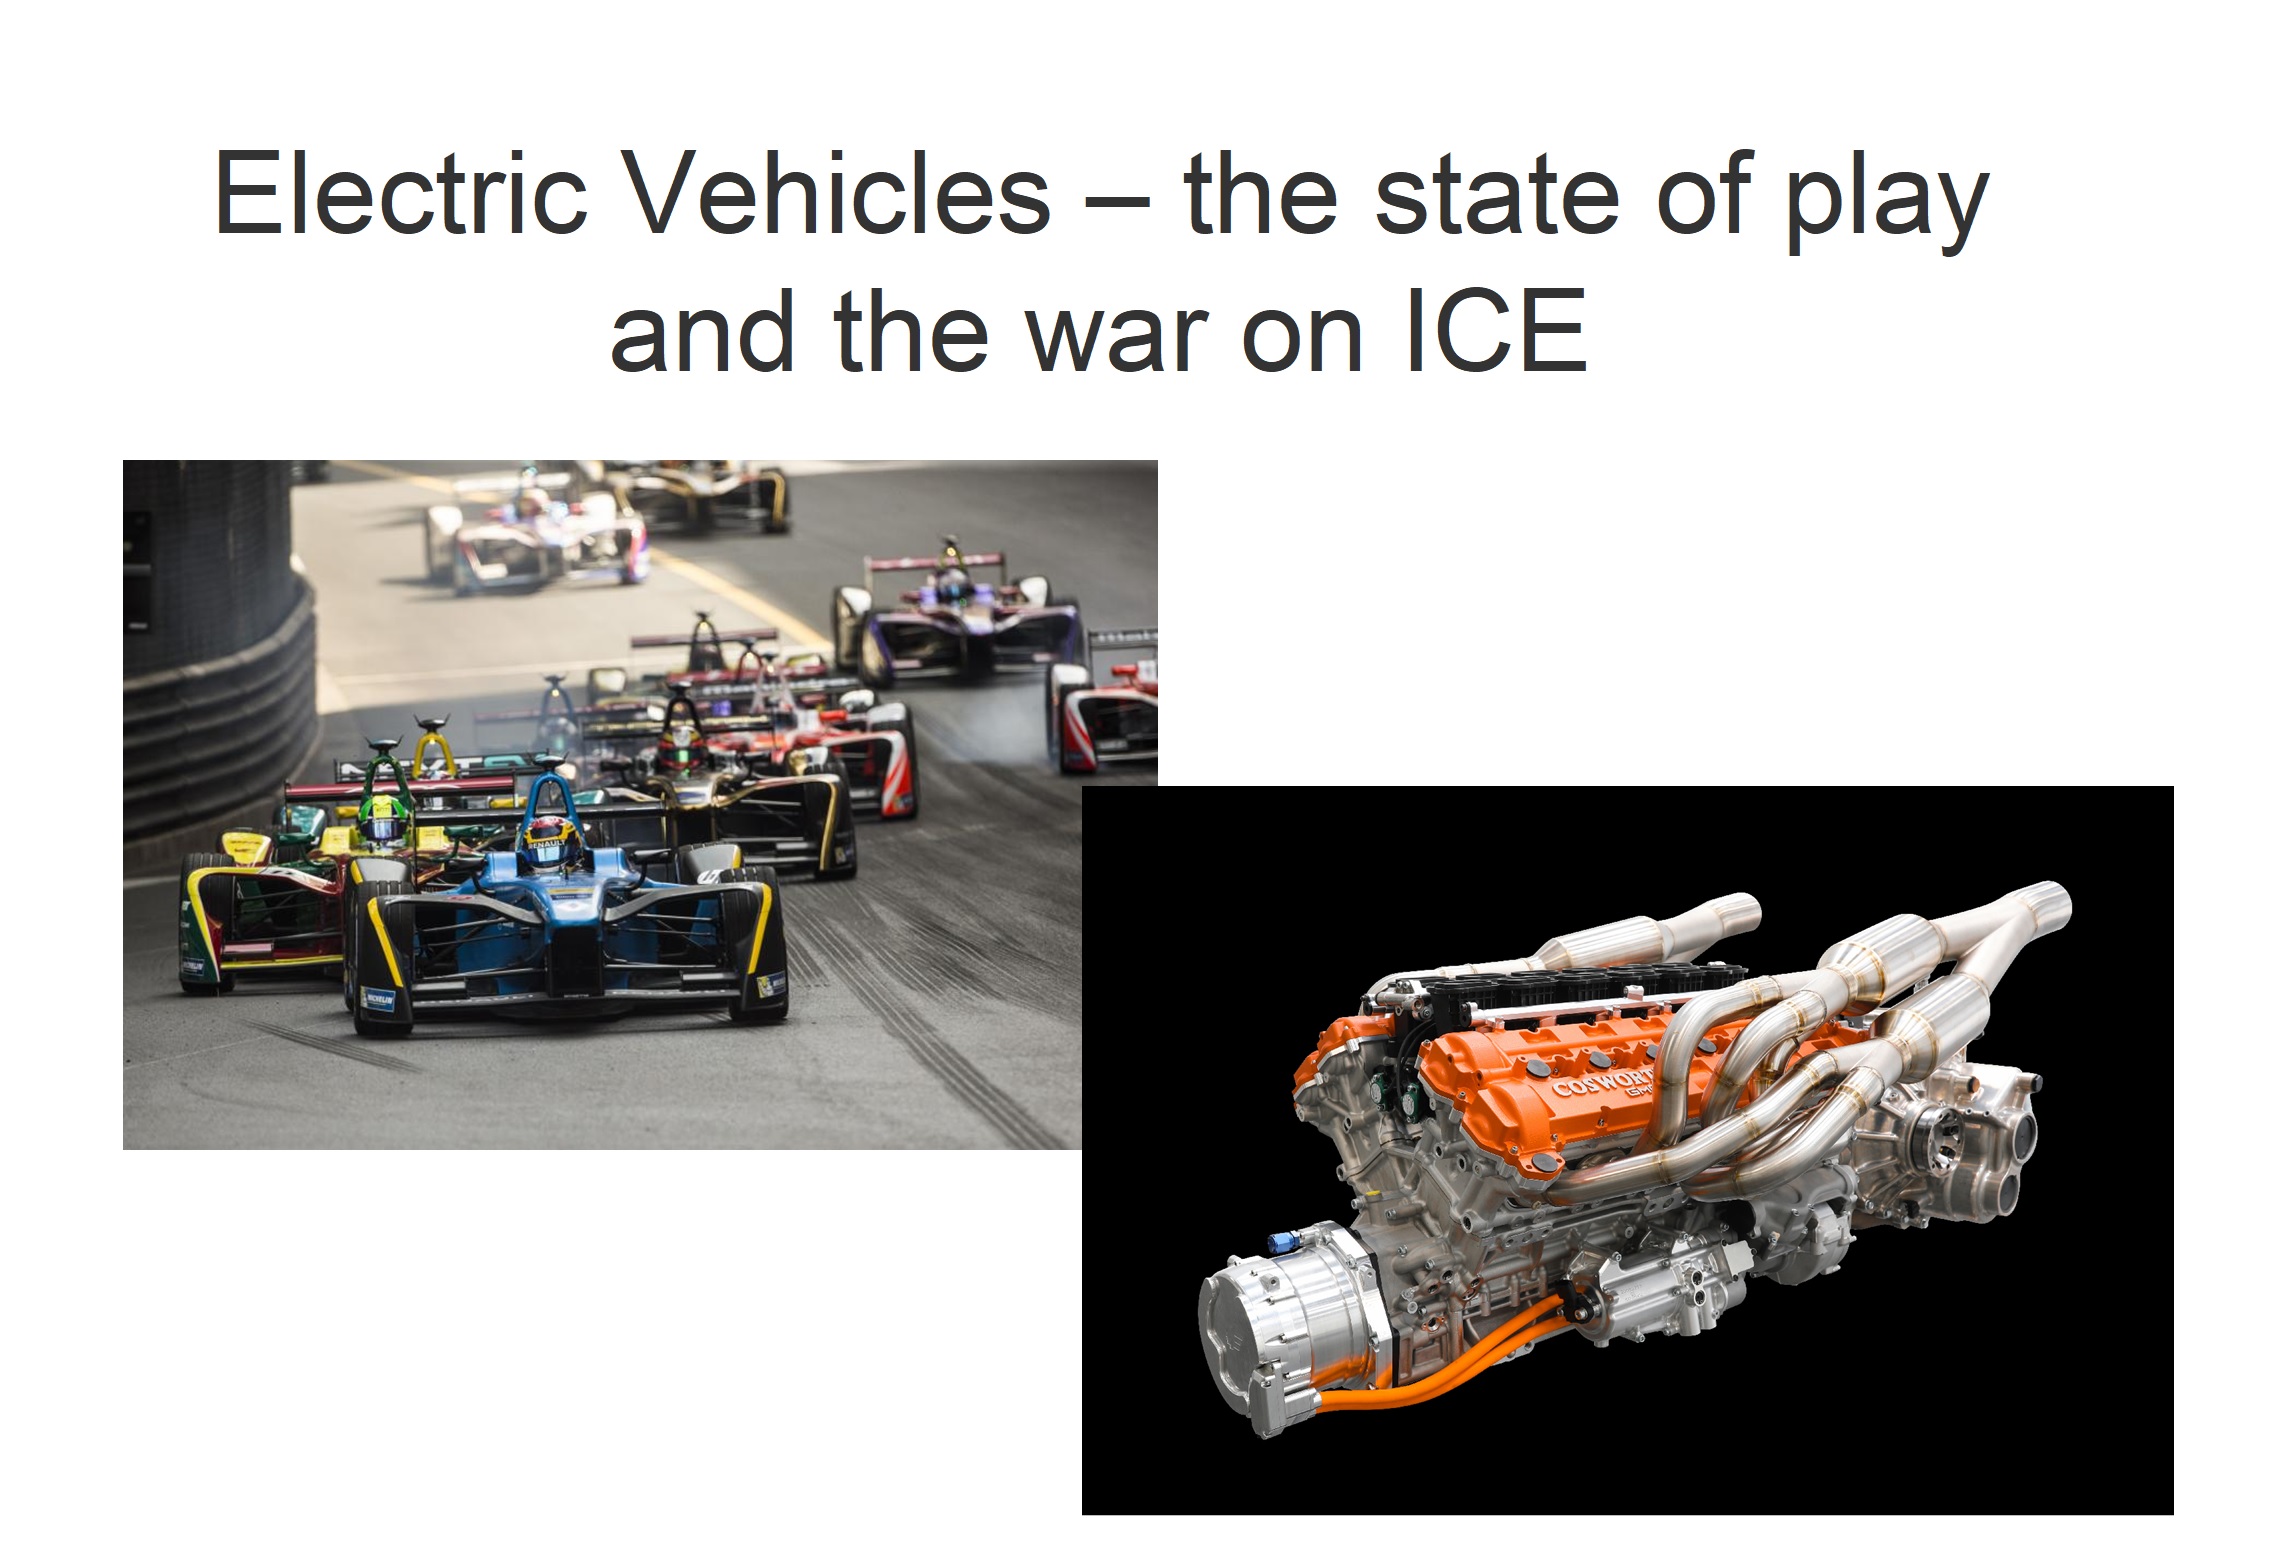 Electric Vehicles – The state of play and the war waged on the Internal Combustion Engine (ICE)